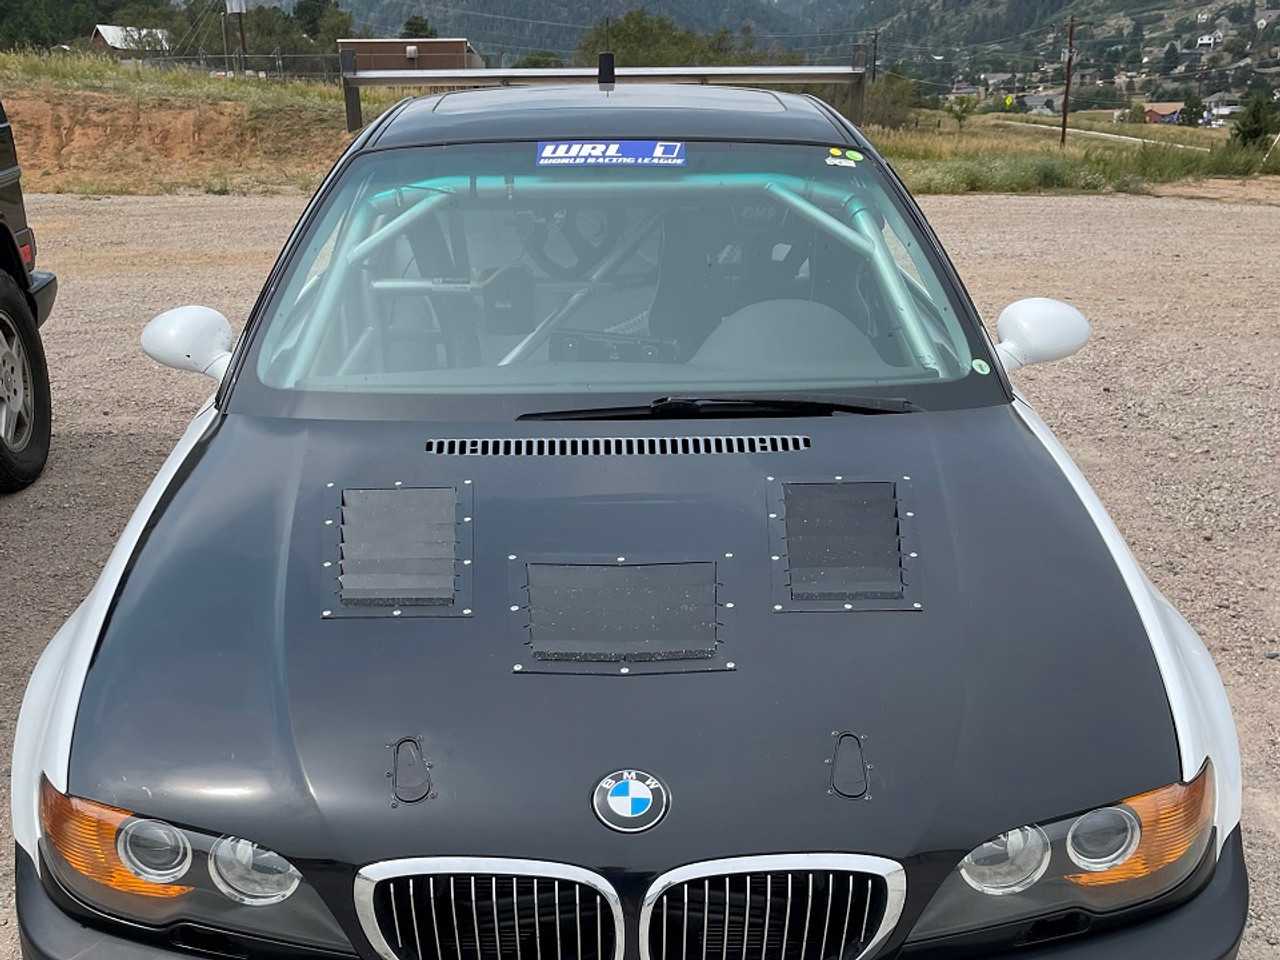 Race Louver BMW E46 RT track trim center car hood extractor is designed for street, high performance driving and track duty.